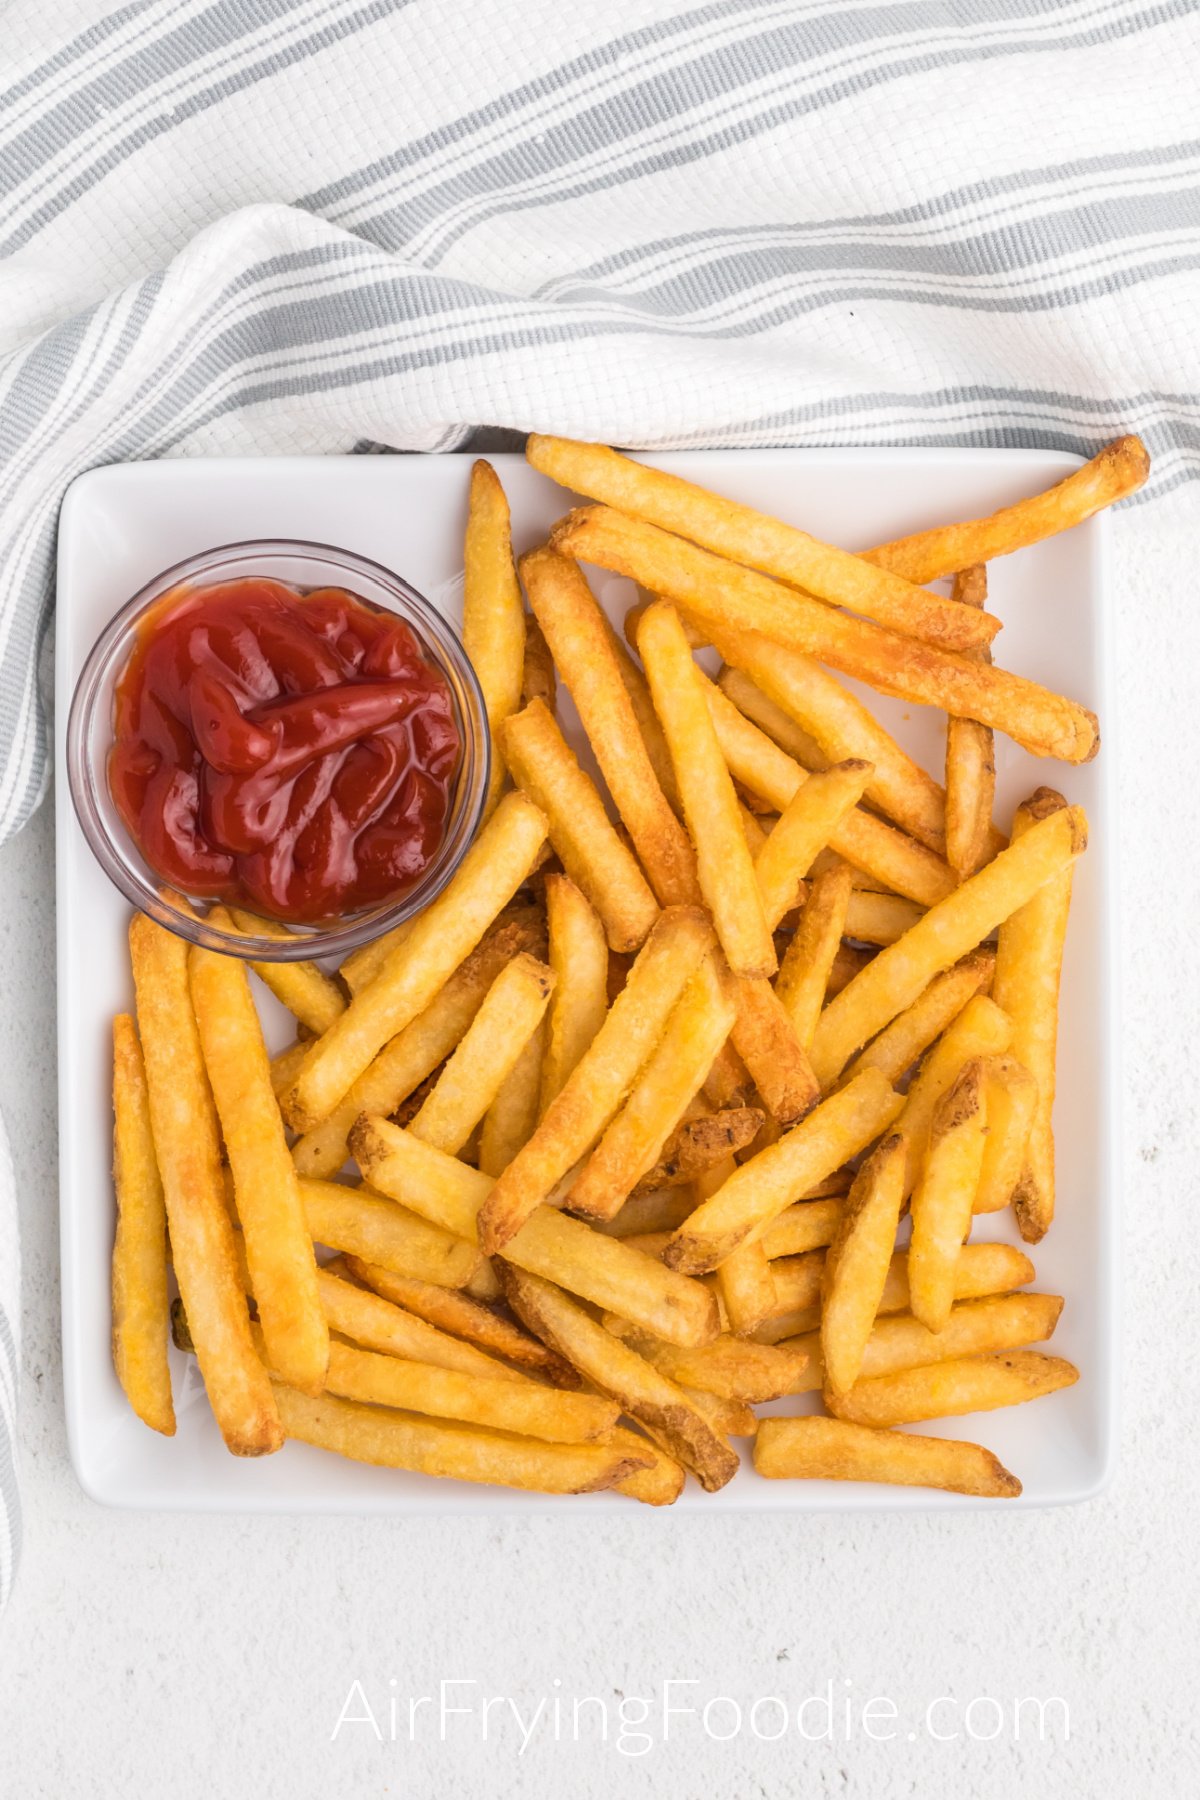 French fries made in the air fryer from frozen, served on a white plate with a side of ketchup.